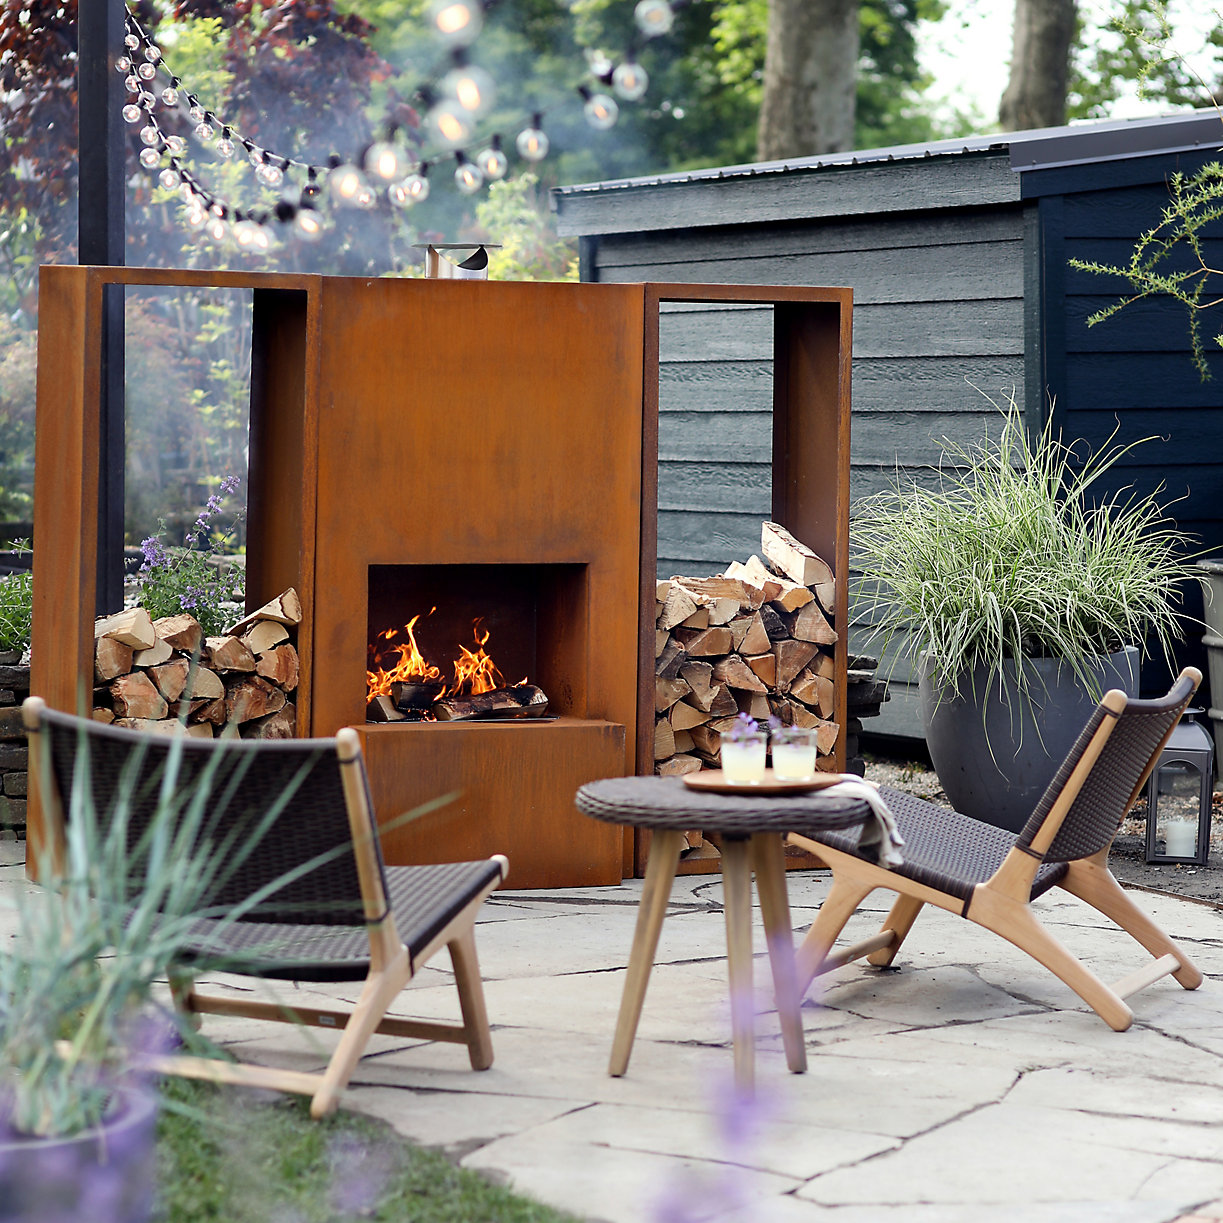 Weathering Steel Planed Outdoor, Outdoor Metal Fireplace With Chimney